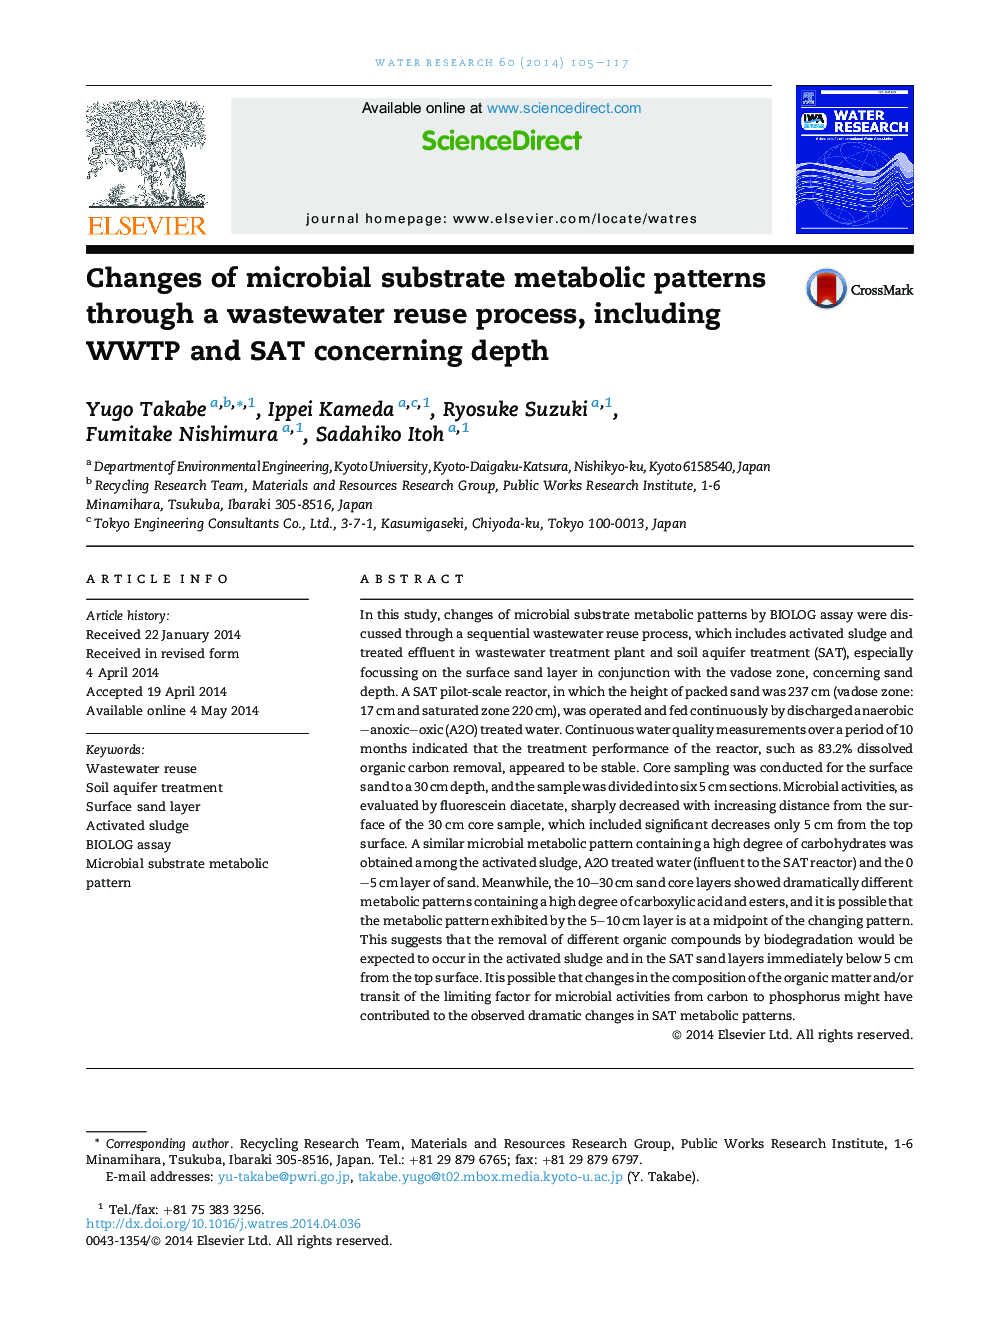 Changes of microbial substrate metabolic patterns through a wastewater reuse process, including WWTP and SAT concerning depth